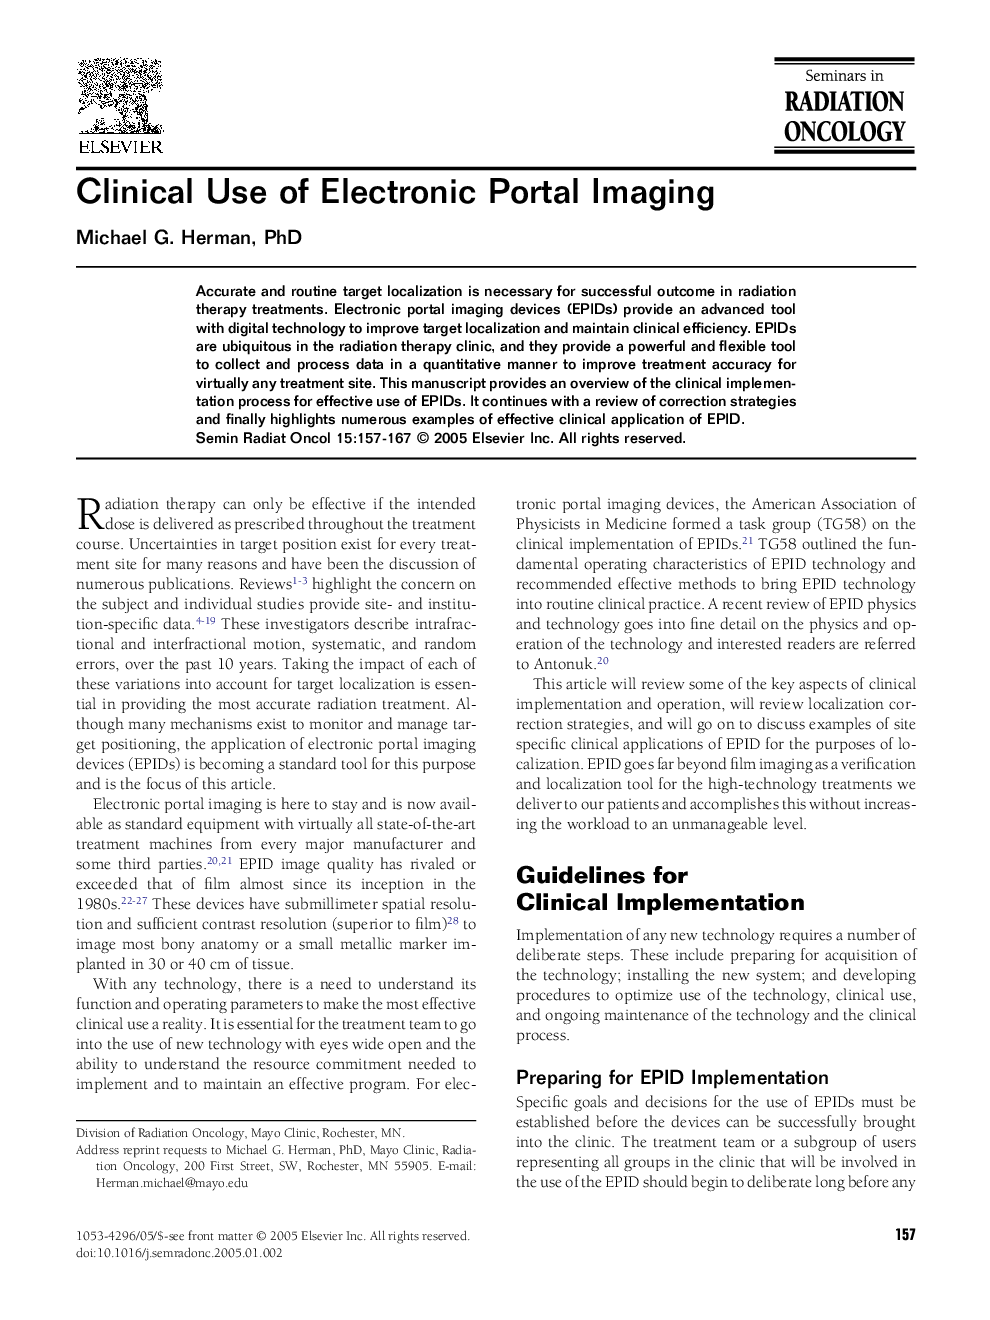 Clinical Use of Electronic Portal Imaging